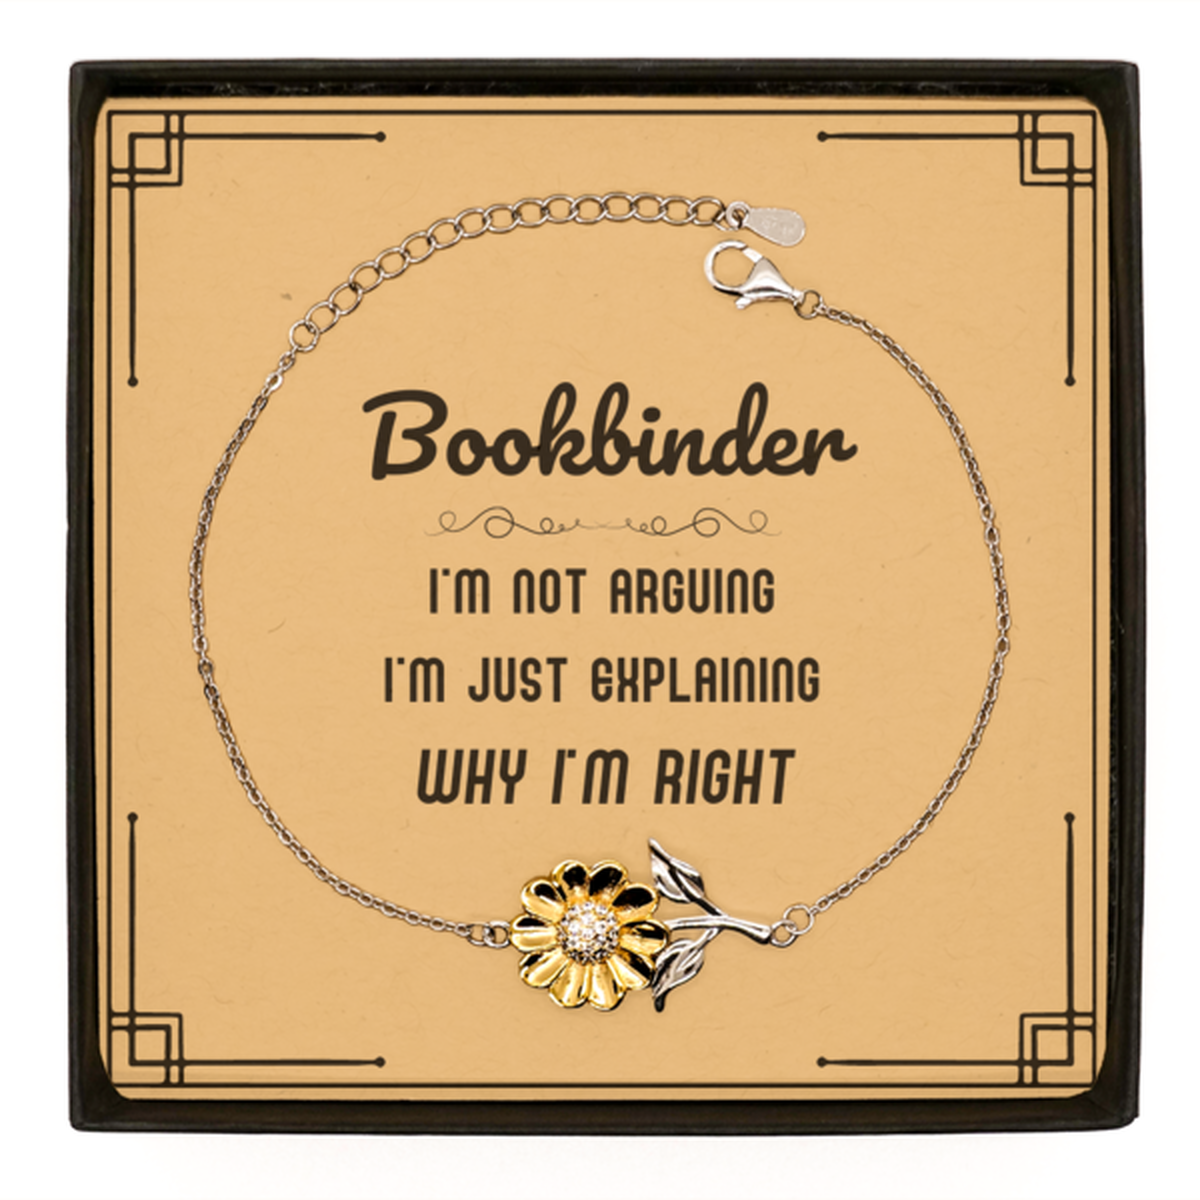 Bookbinder I'm not Arguing. I'm Just Explaining Why I'm RIGHT Sunflower Bracelet, Funny Saying Quote Bookbinder Gifts For Bookbinder Message Card Graduation Birthday Christmas Gifts for Men Women Coworker